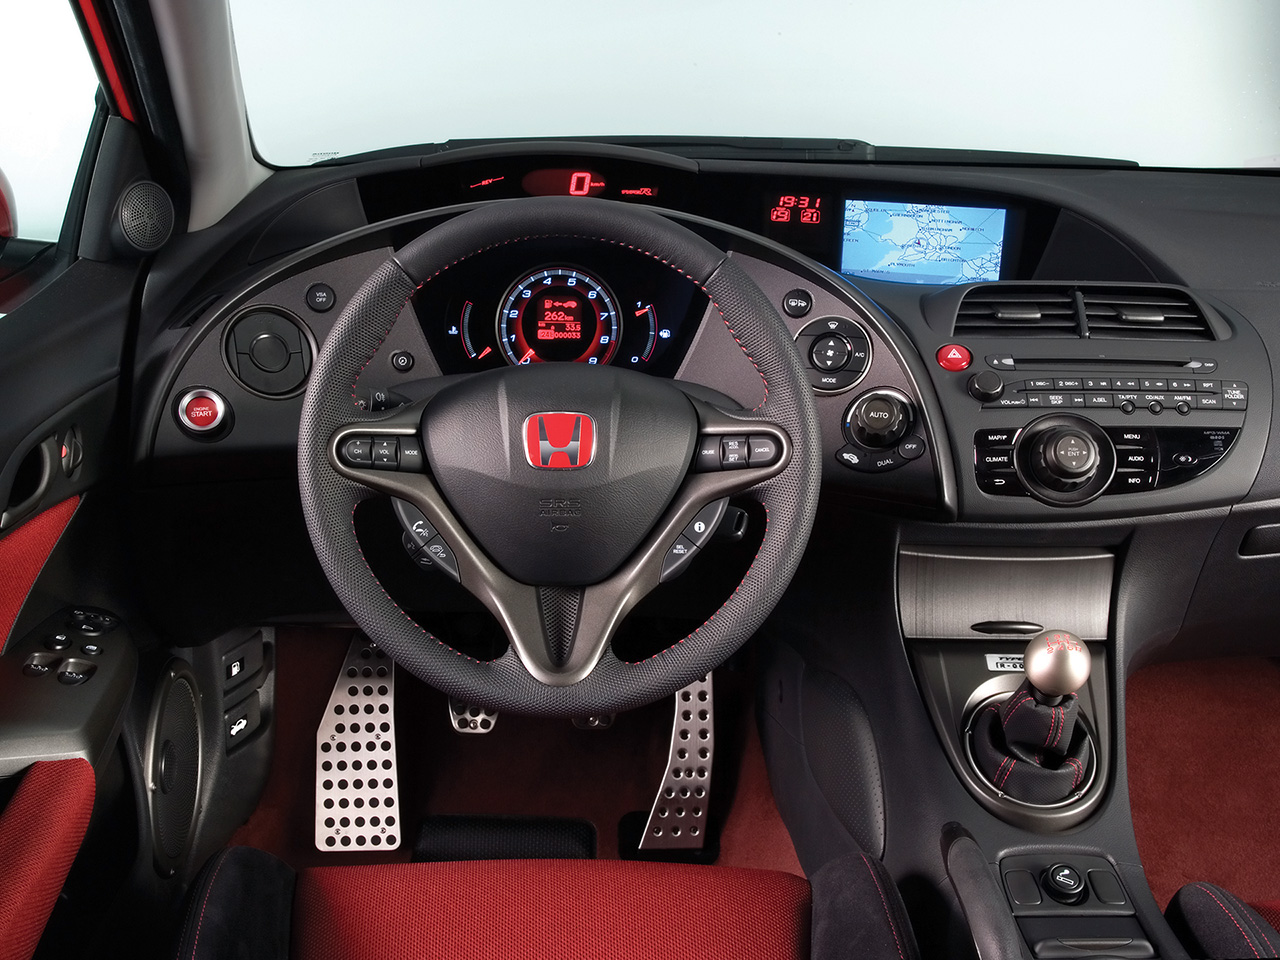 Civic Type R wallpapers in wide range of HD resolutions for your PC or